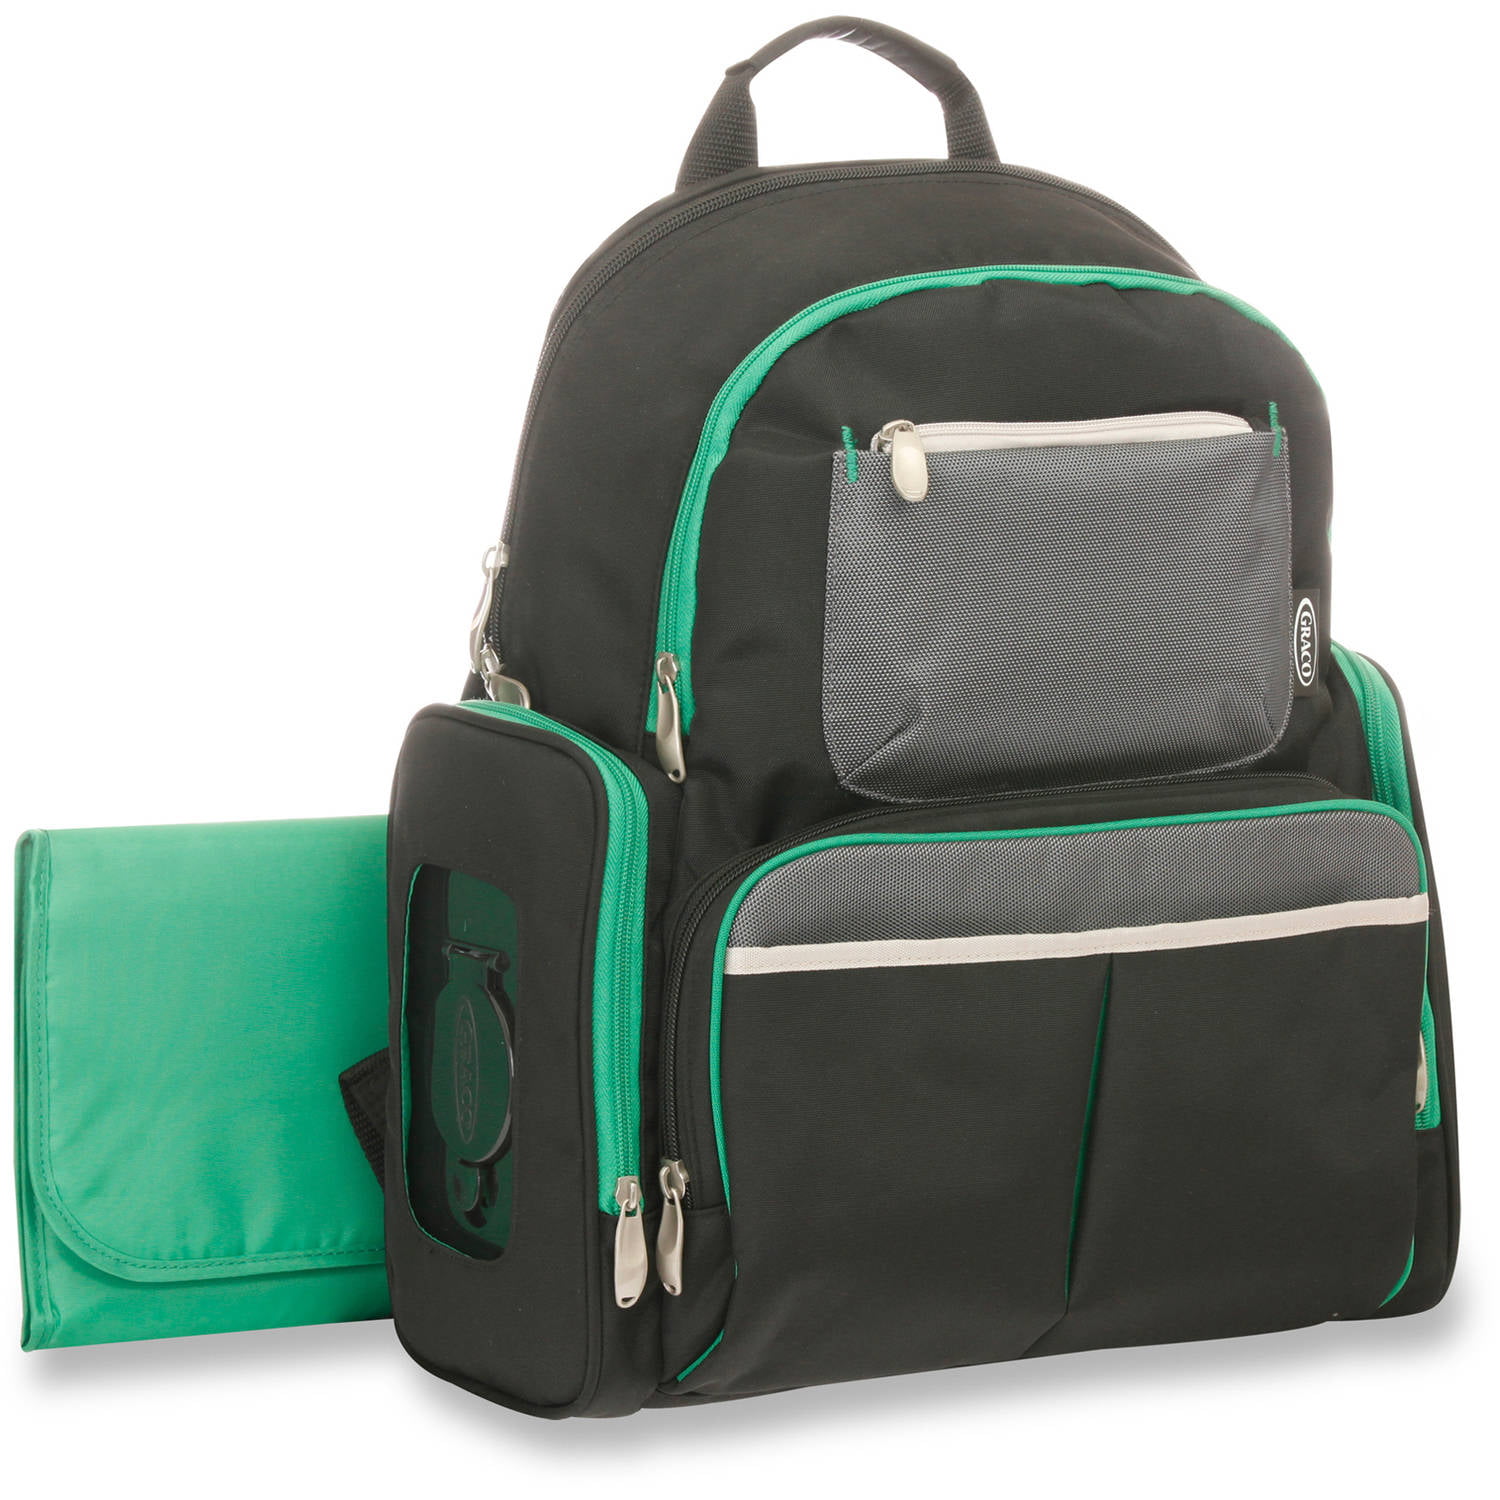 Baby Boom Spaces and Places Backpack Diaper Bag - www.bagssaleusa.com